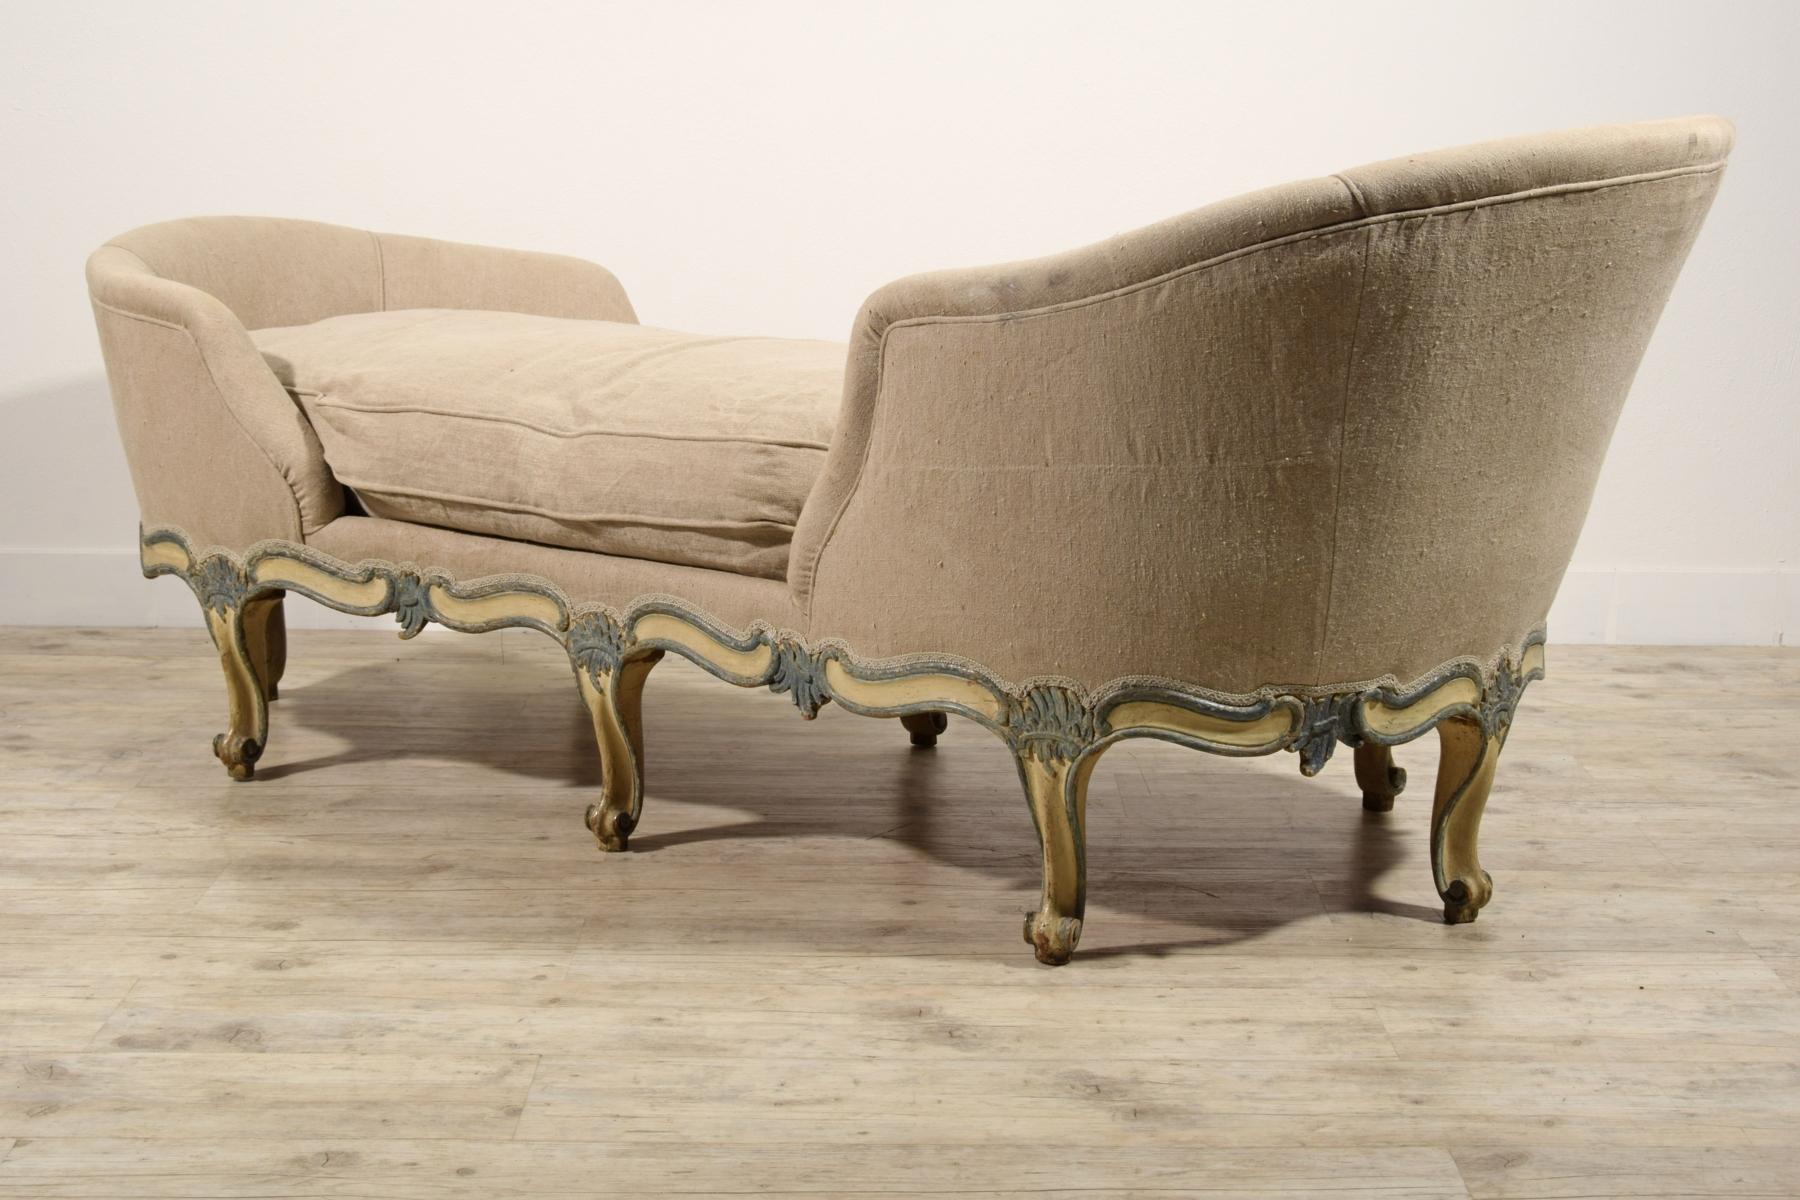 18th Century, Italian Baroque Carved and Lacquered Wood Chaise Longue  10